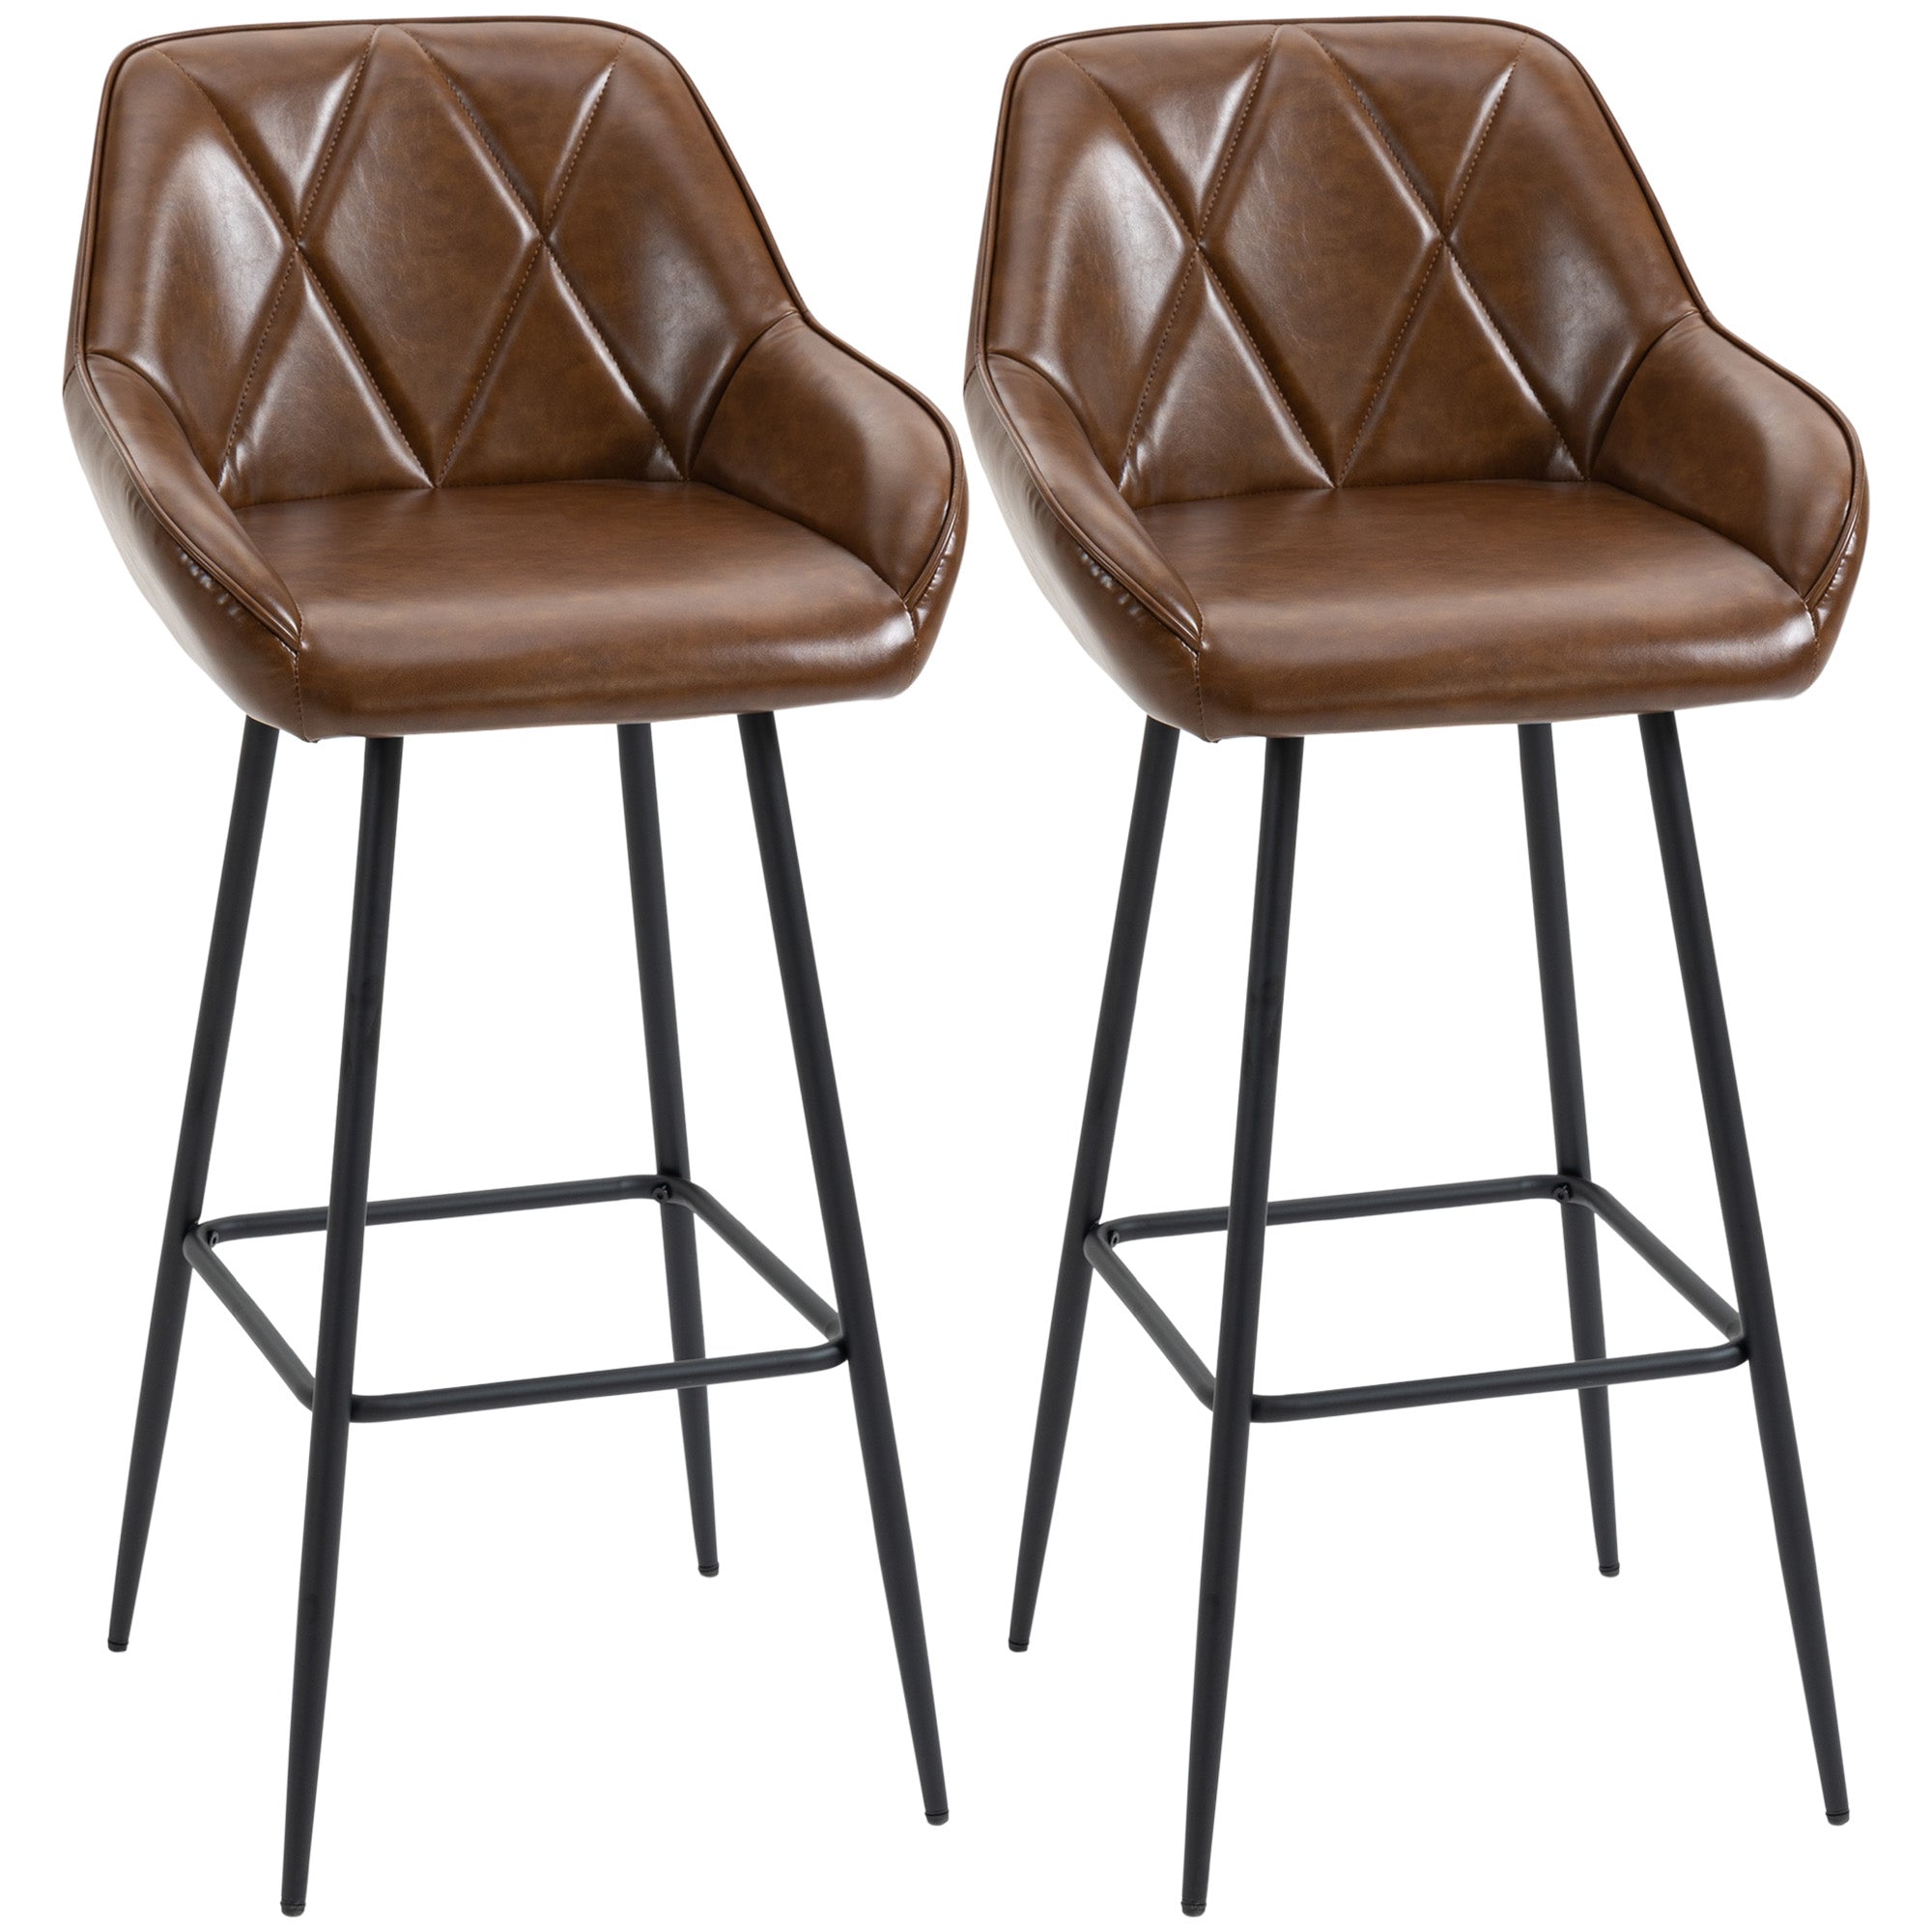 Retro Bar Stools Set of 2, Breakfast Bar Chairs with Footrest, Kitchen Stools with Backs and Steel Legs, for Dining Area and Home Bar, Brown-0